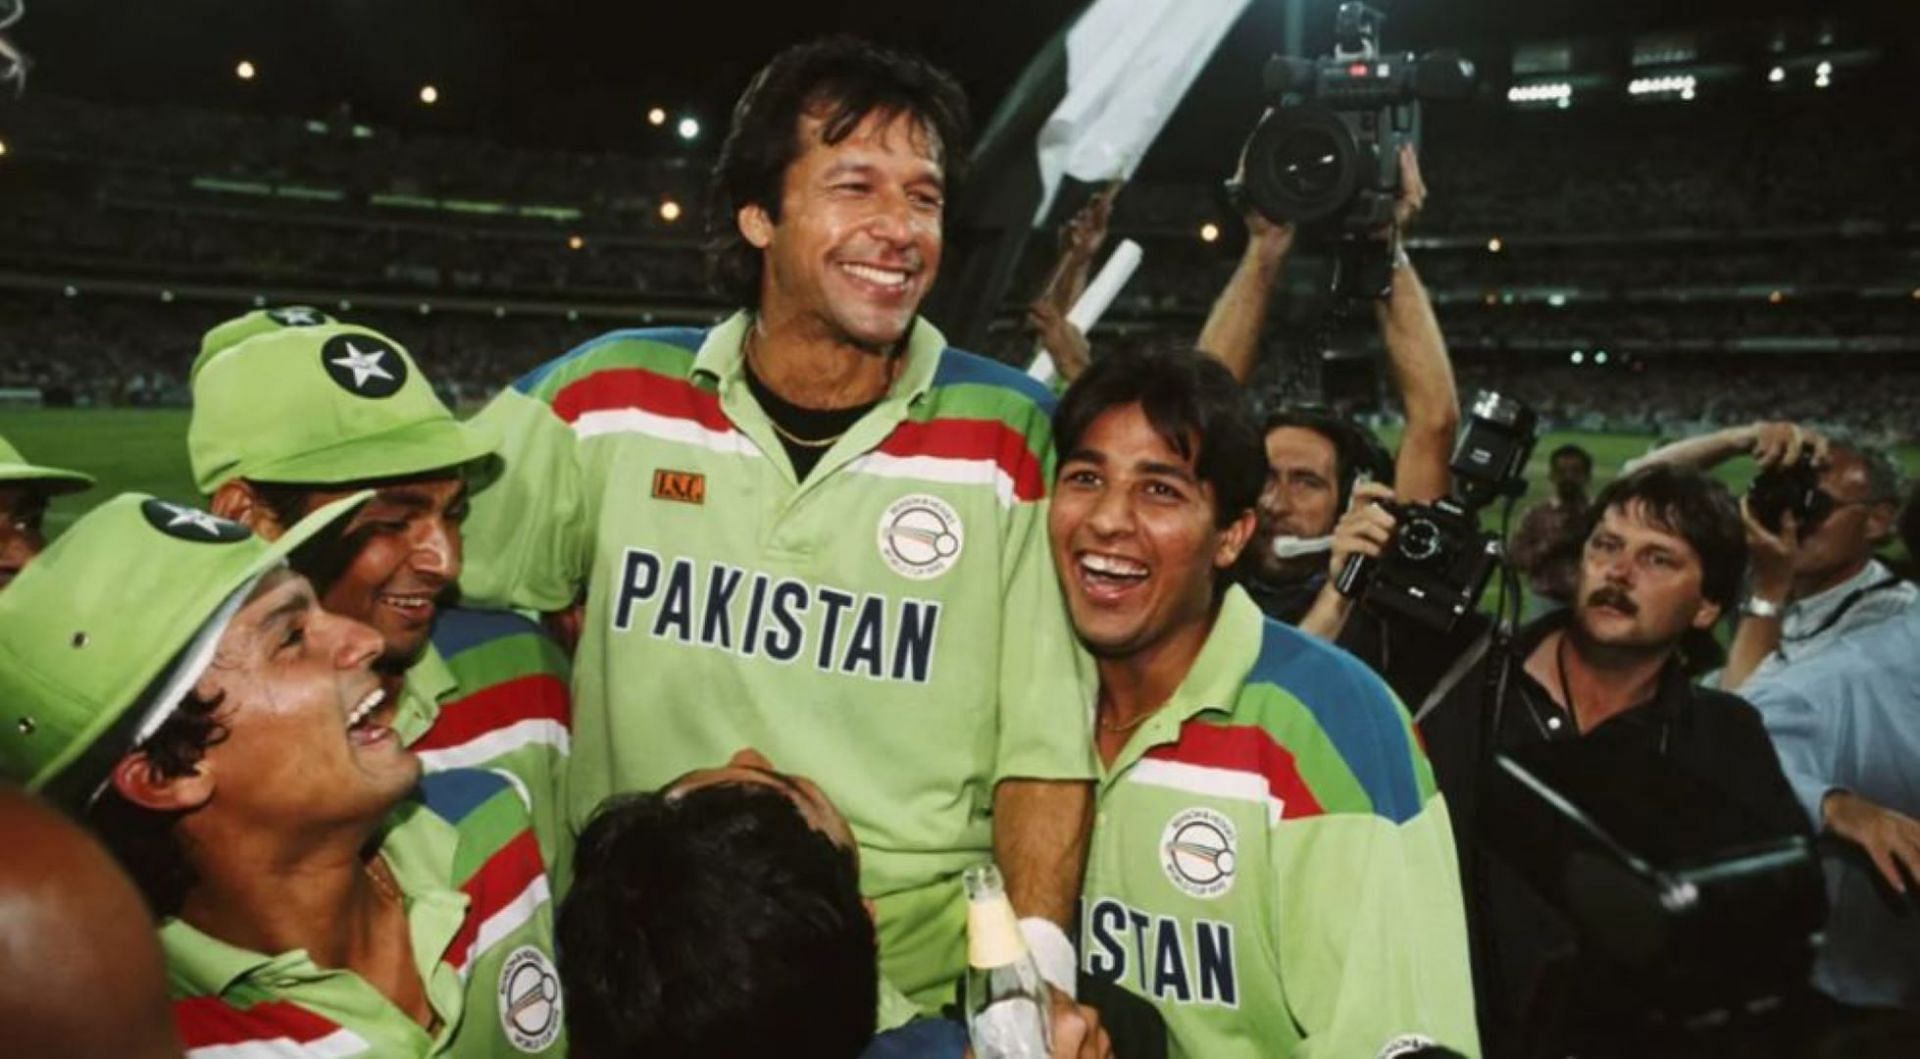 Imran Khan remains arguably the greatest Pakistan cricketer